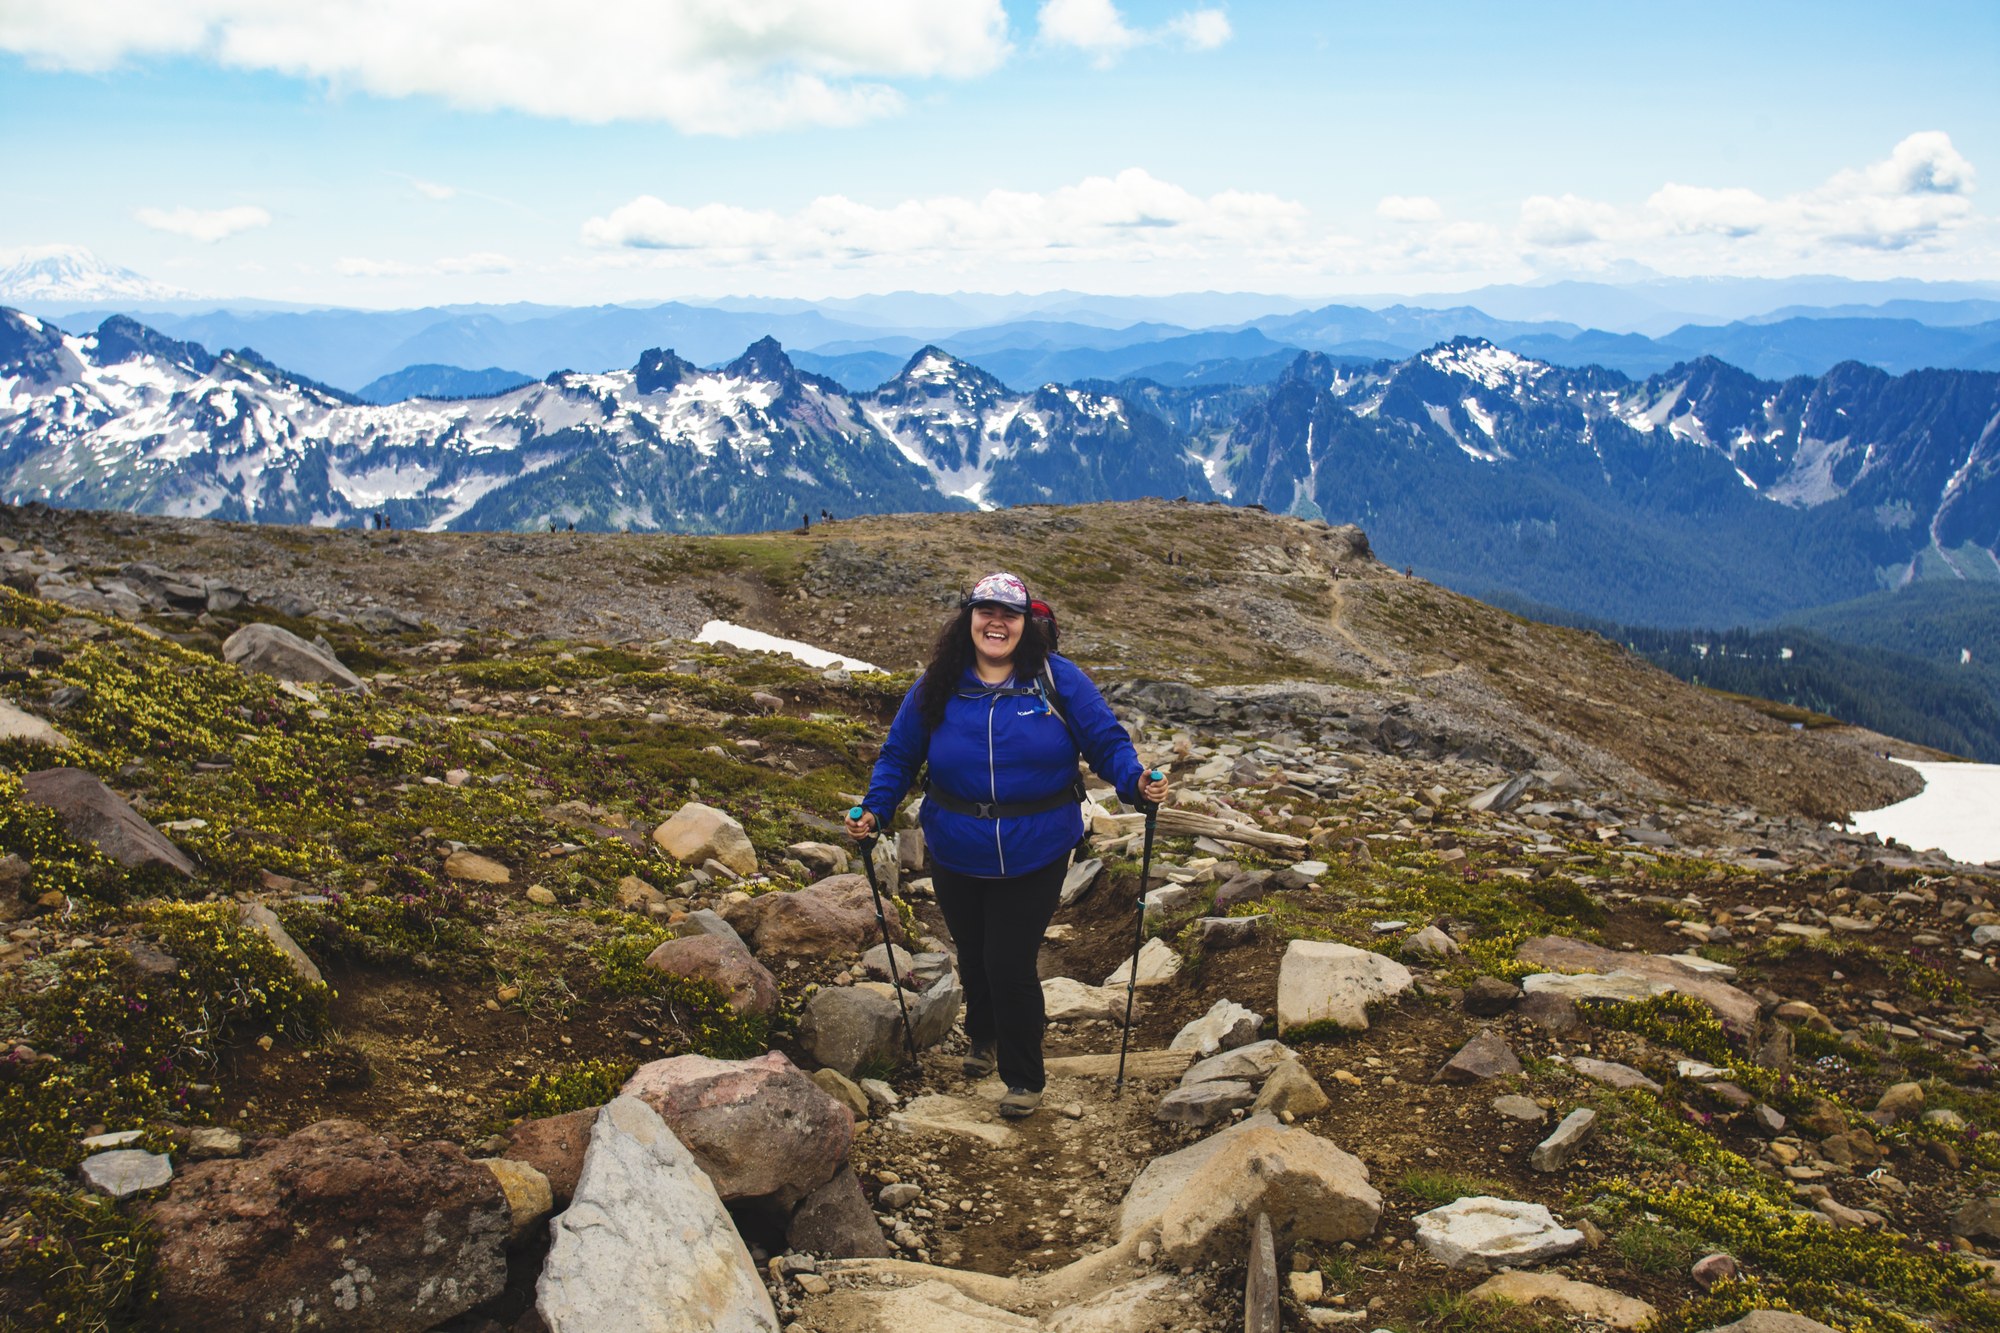 The Best Plus Size Outdoor Apparel — The Mountaineers